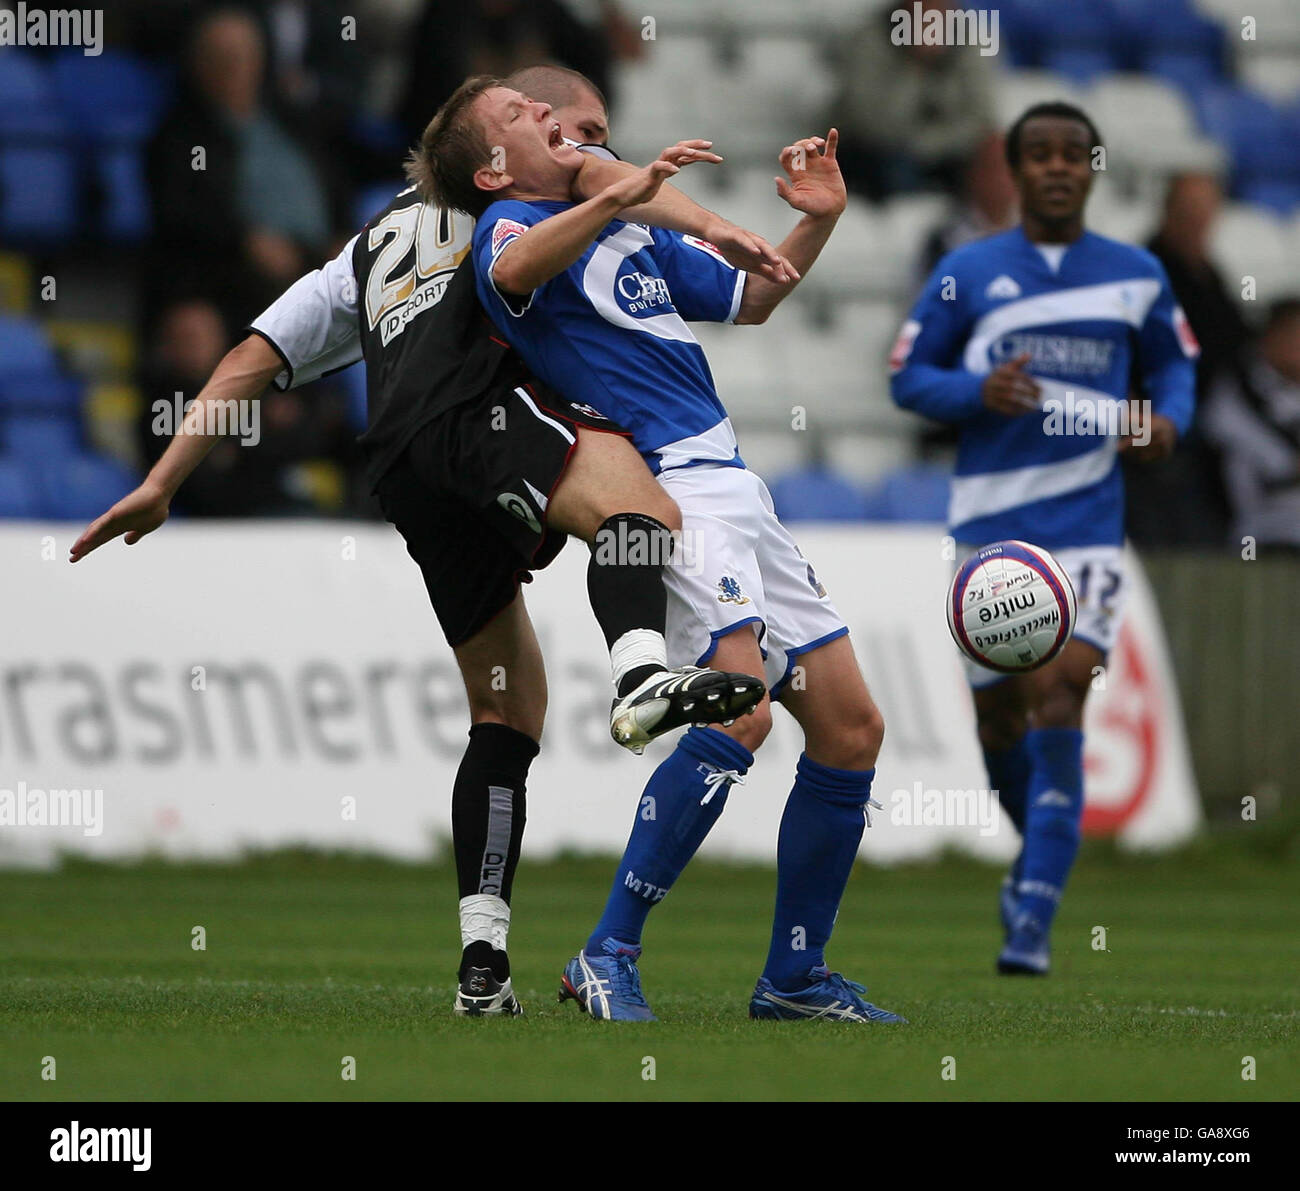 Macclesfield Town's Terry Dunfield tussles with Darlington's Tommy Wright (left) during the League Two match at Moss Rose, Macclesfield. Stock Photo